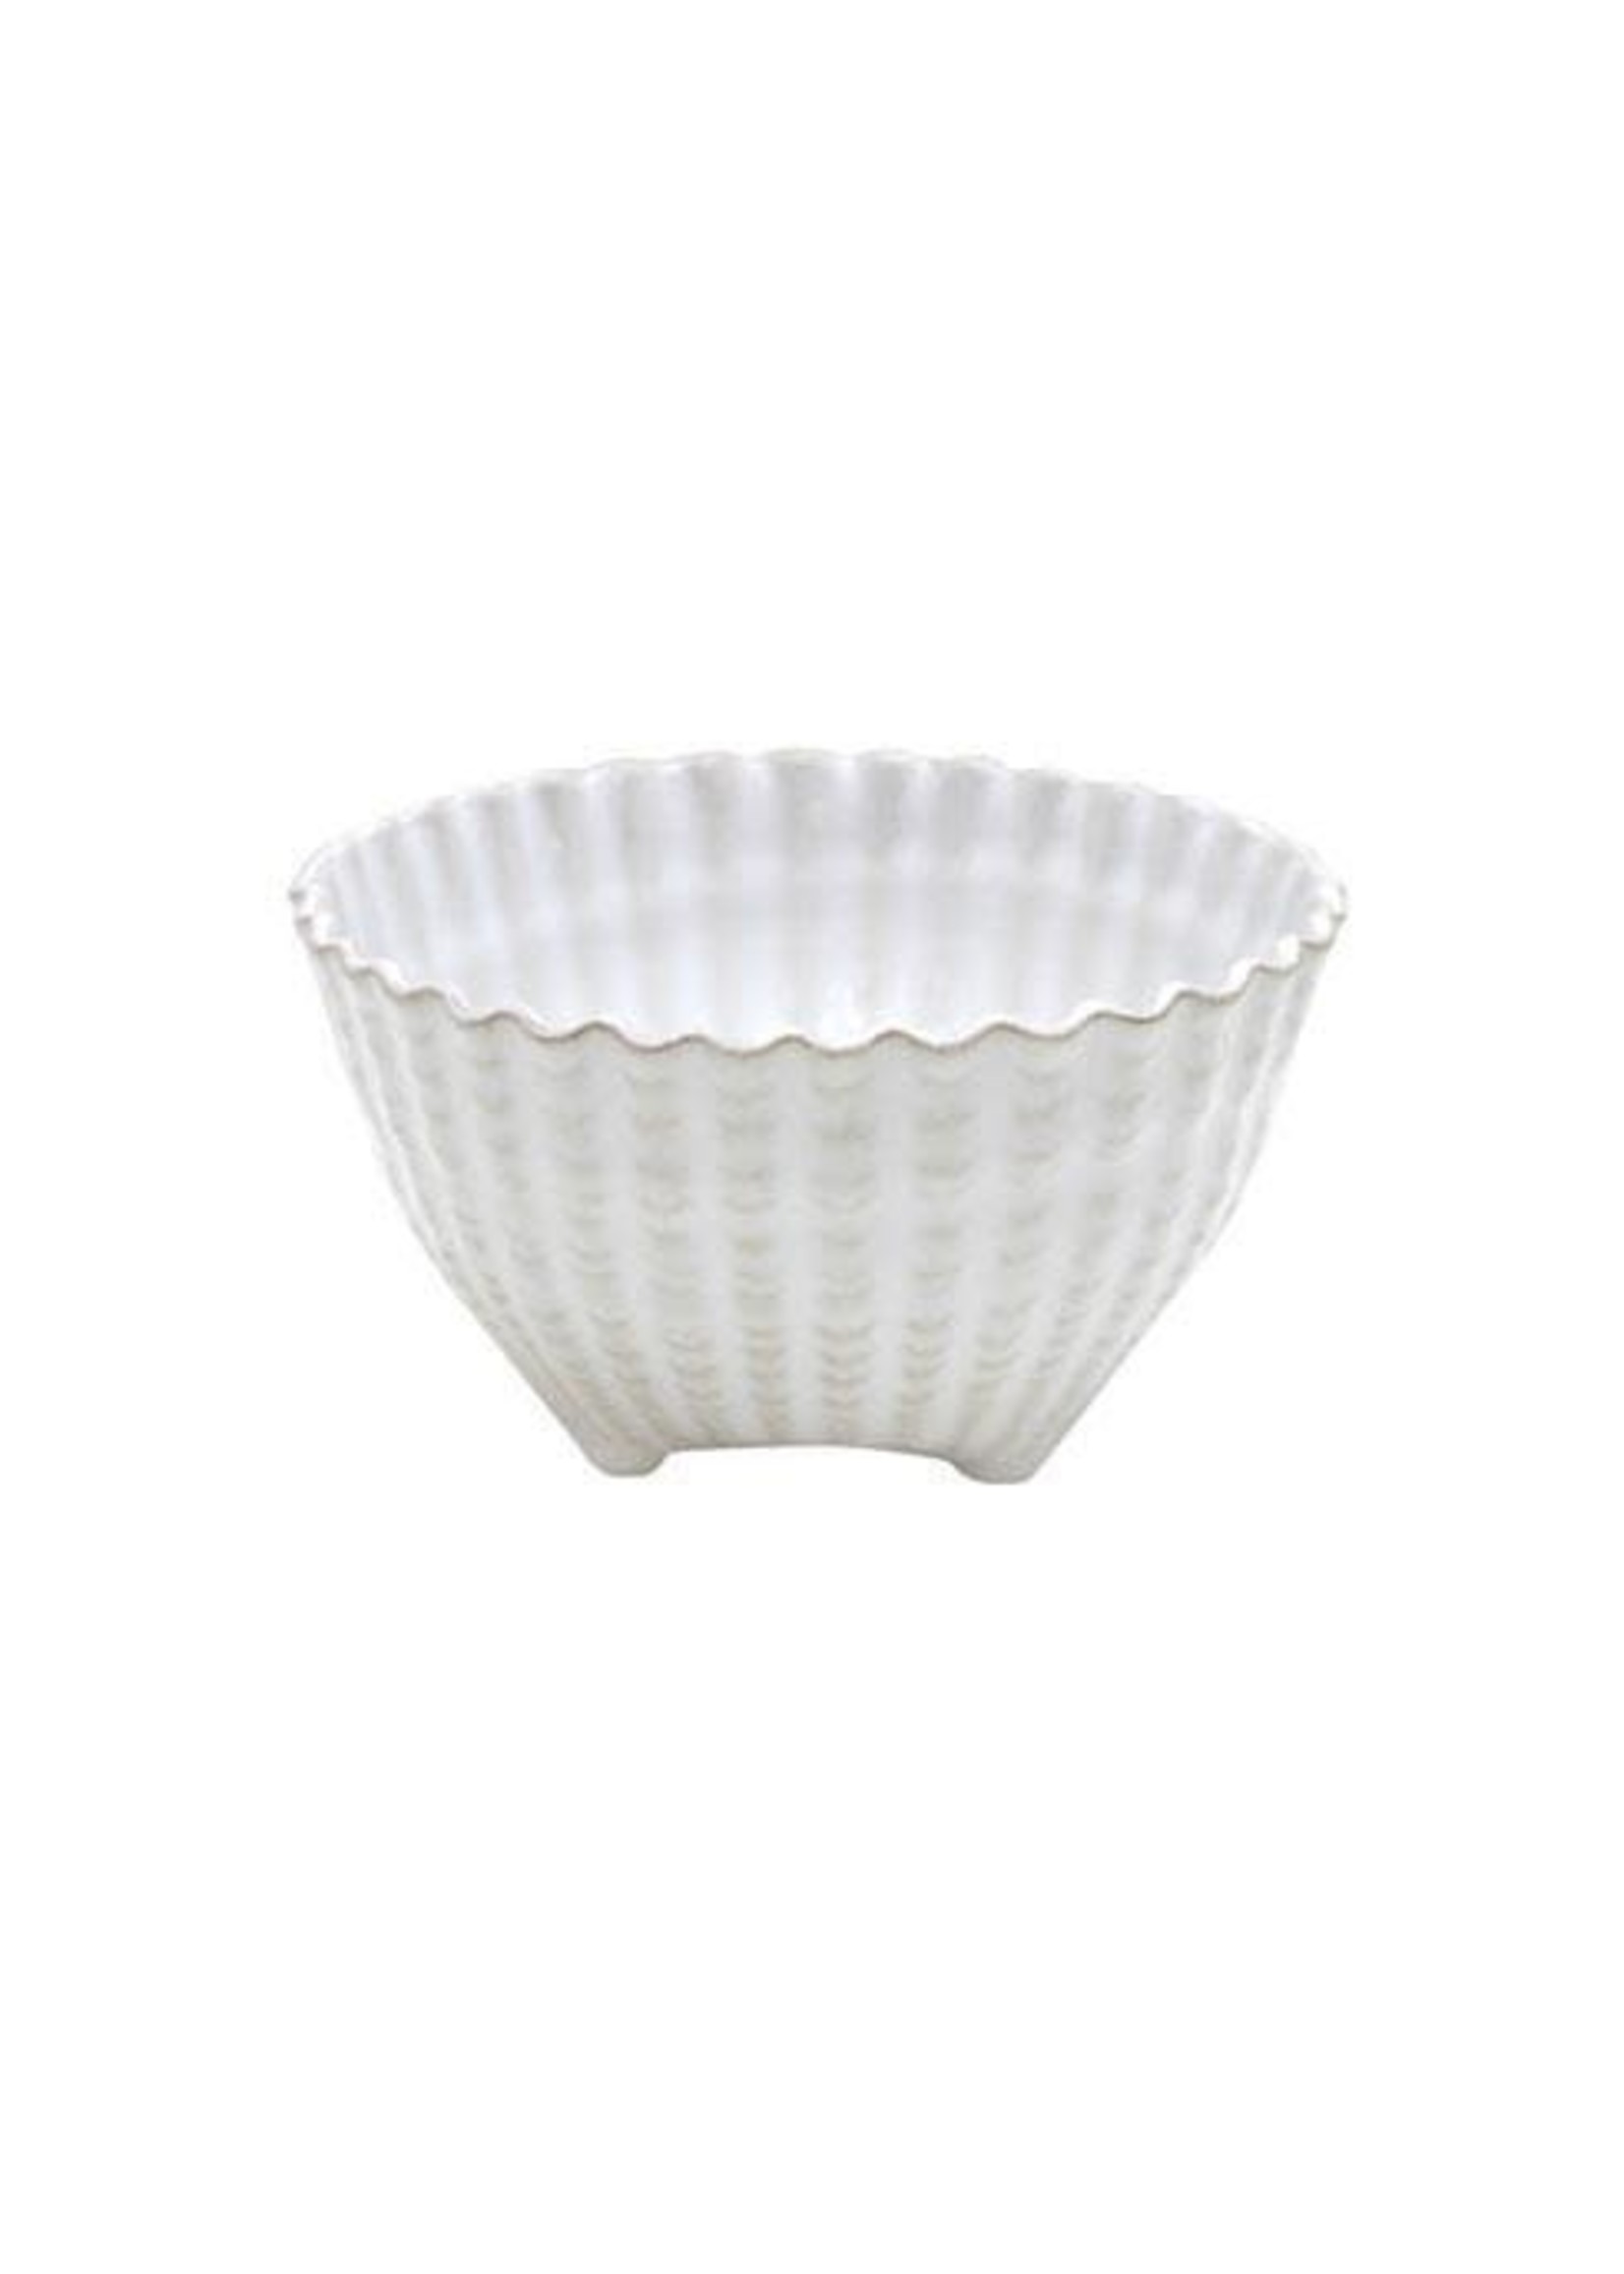 CASAFINA LIVING APARTE SHELL FOOTED BOWL 6"-WHITE